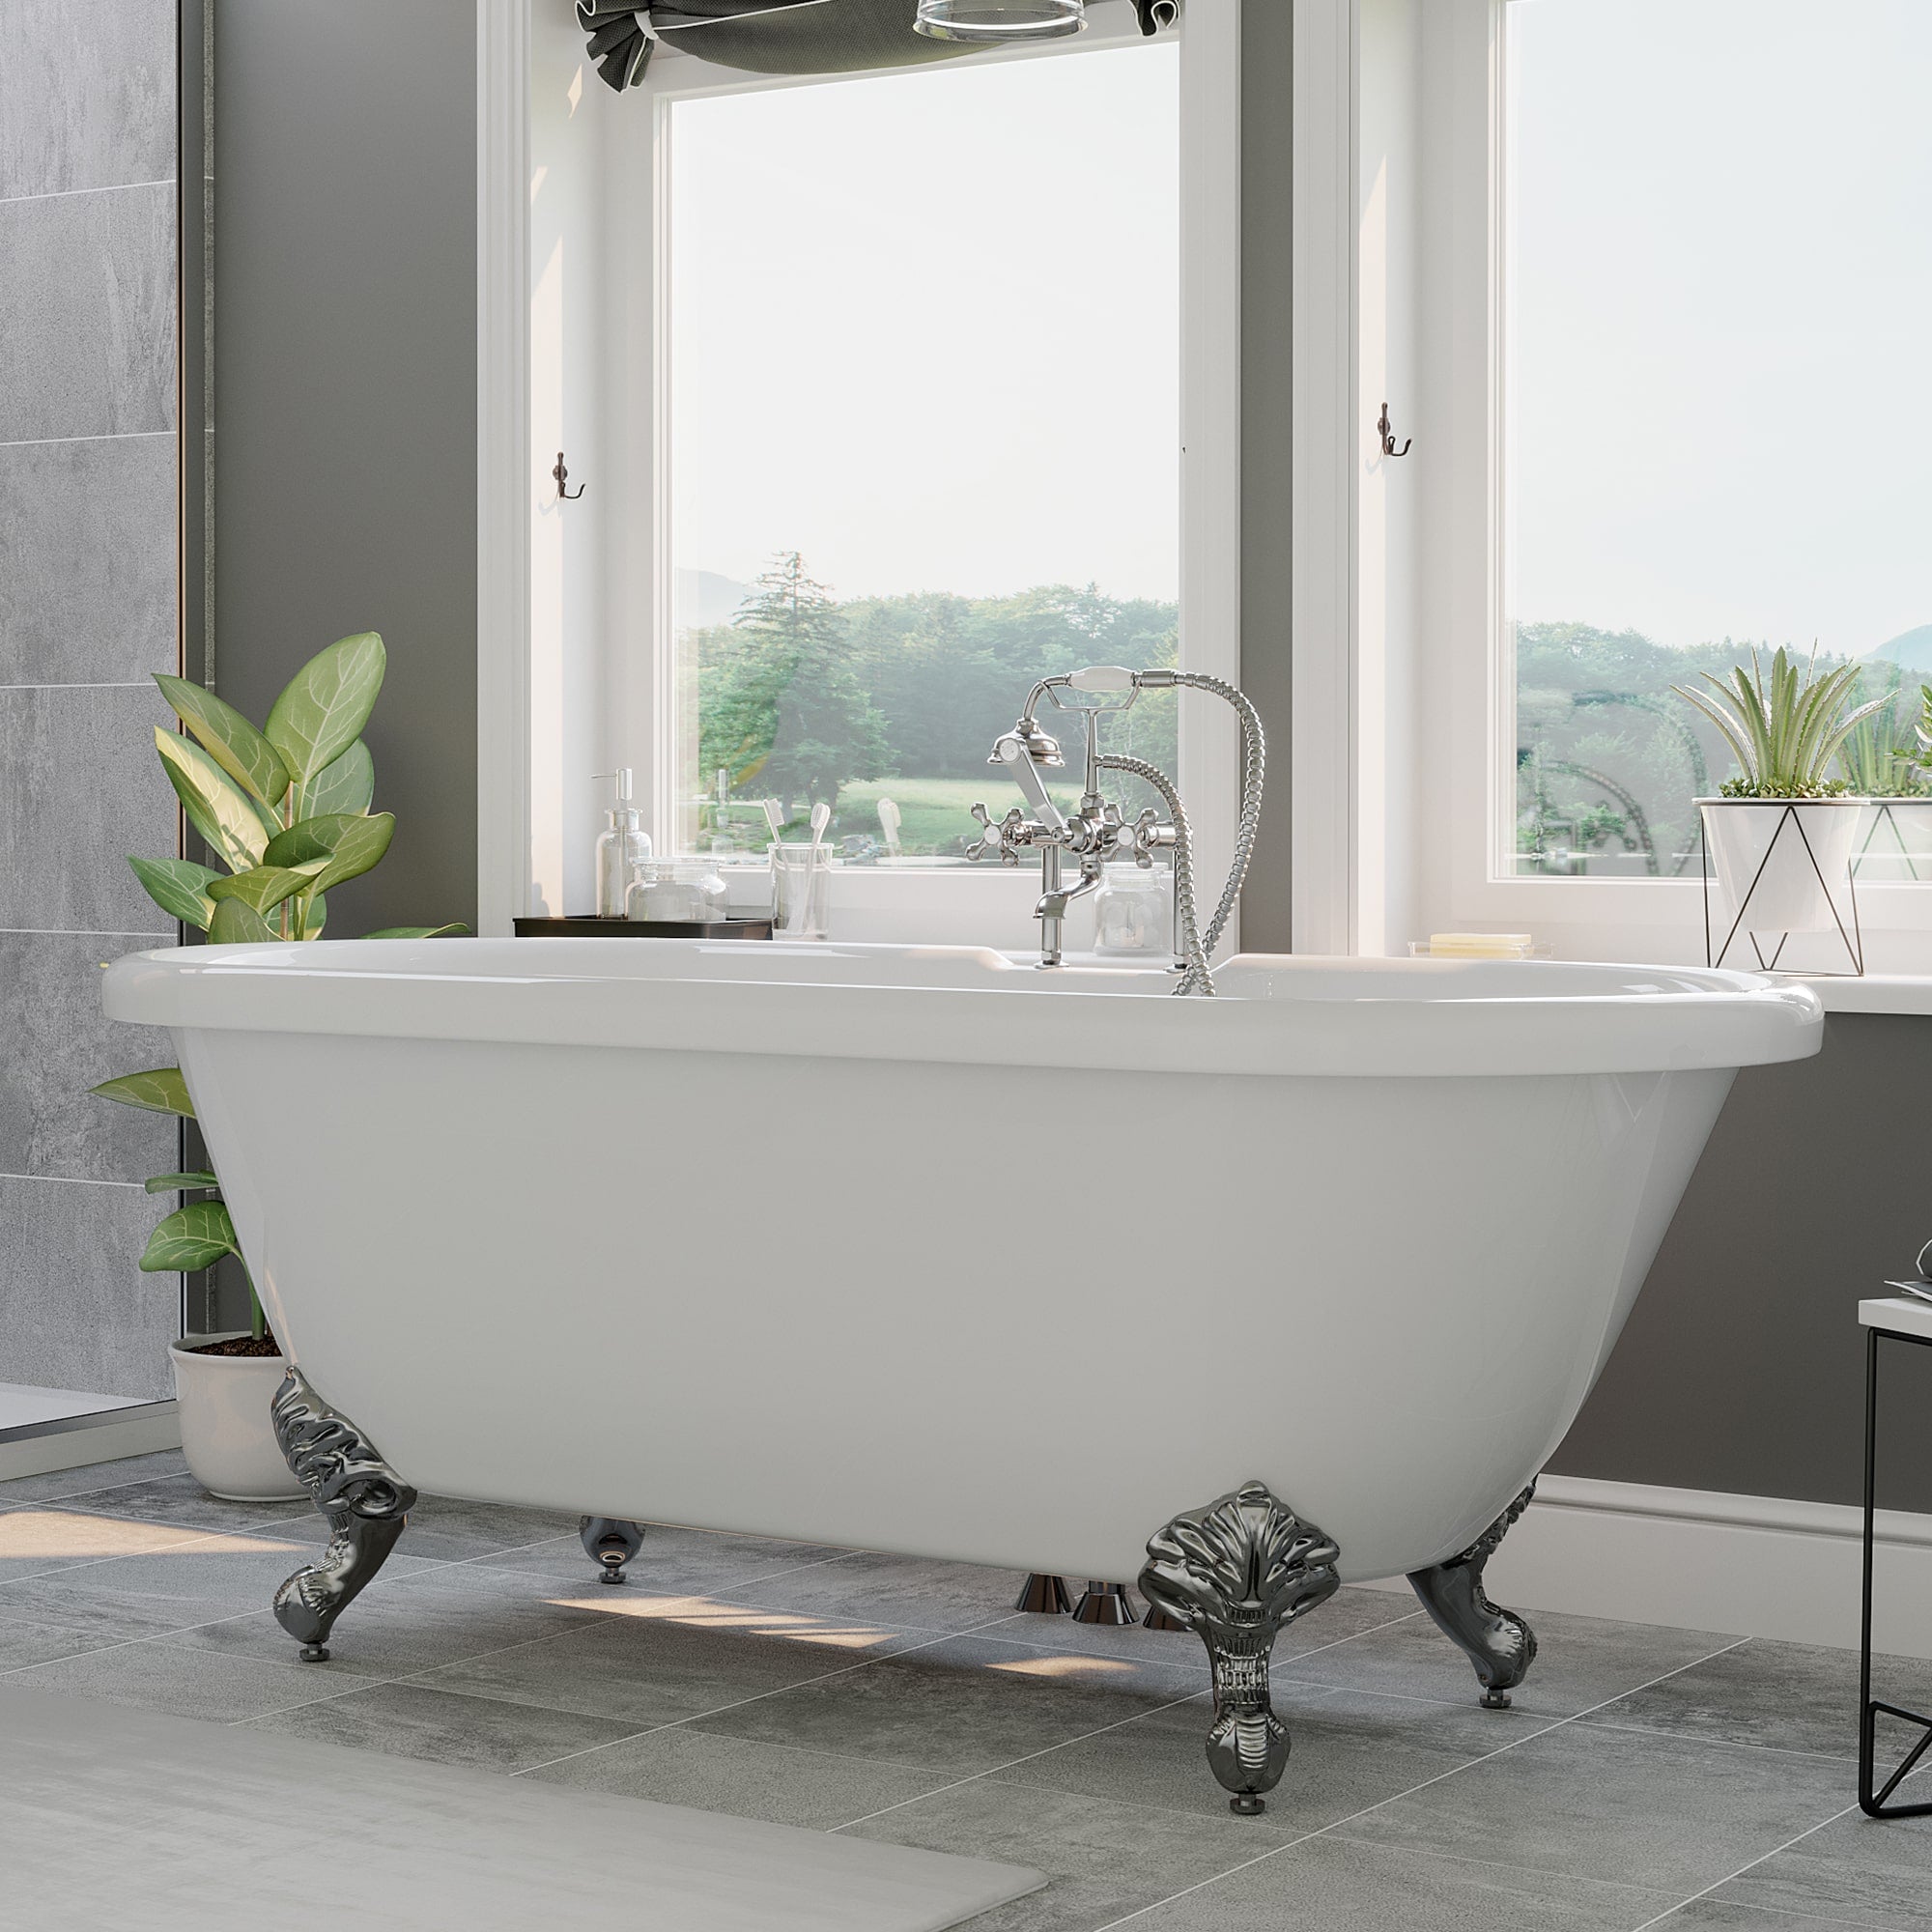 Cambridge Plumbing Double Ended Acrylic Clawfoot Soaking Tub ( White Gloss Finish) and Complete Plumbing Package ADE-463D-6-PKG-7DH - with brushed nickel ball and claws feet and brushed nickel plumbing package - Vital Hydrotherapy